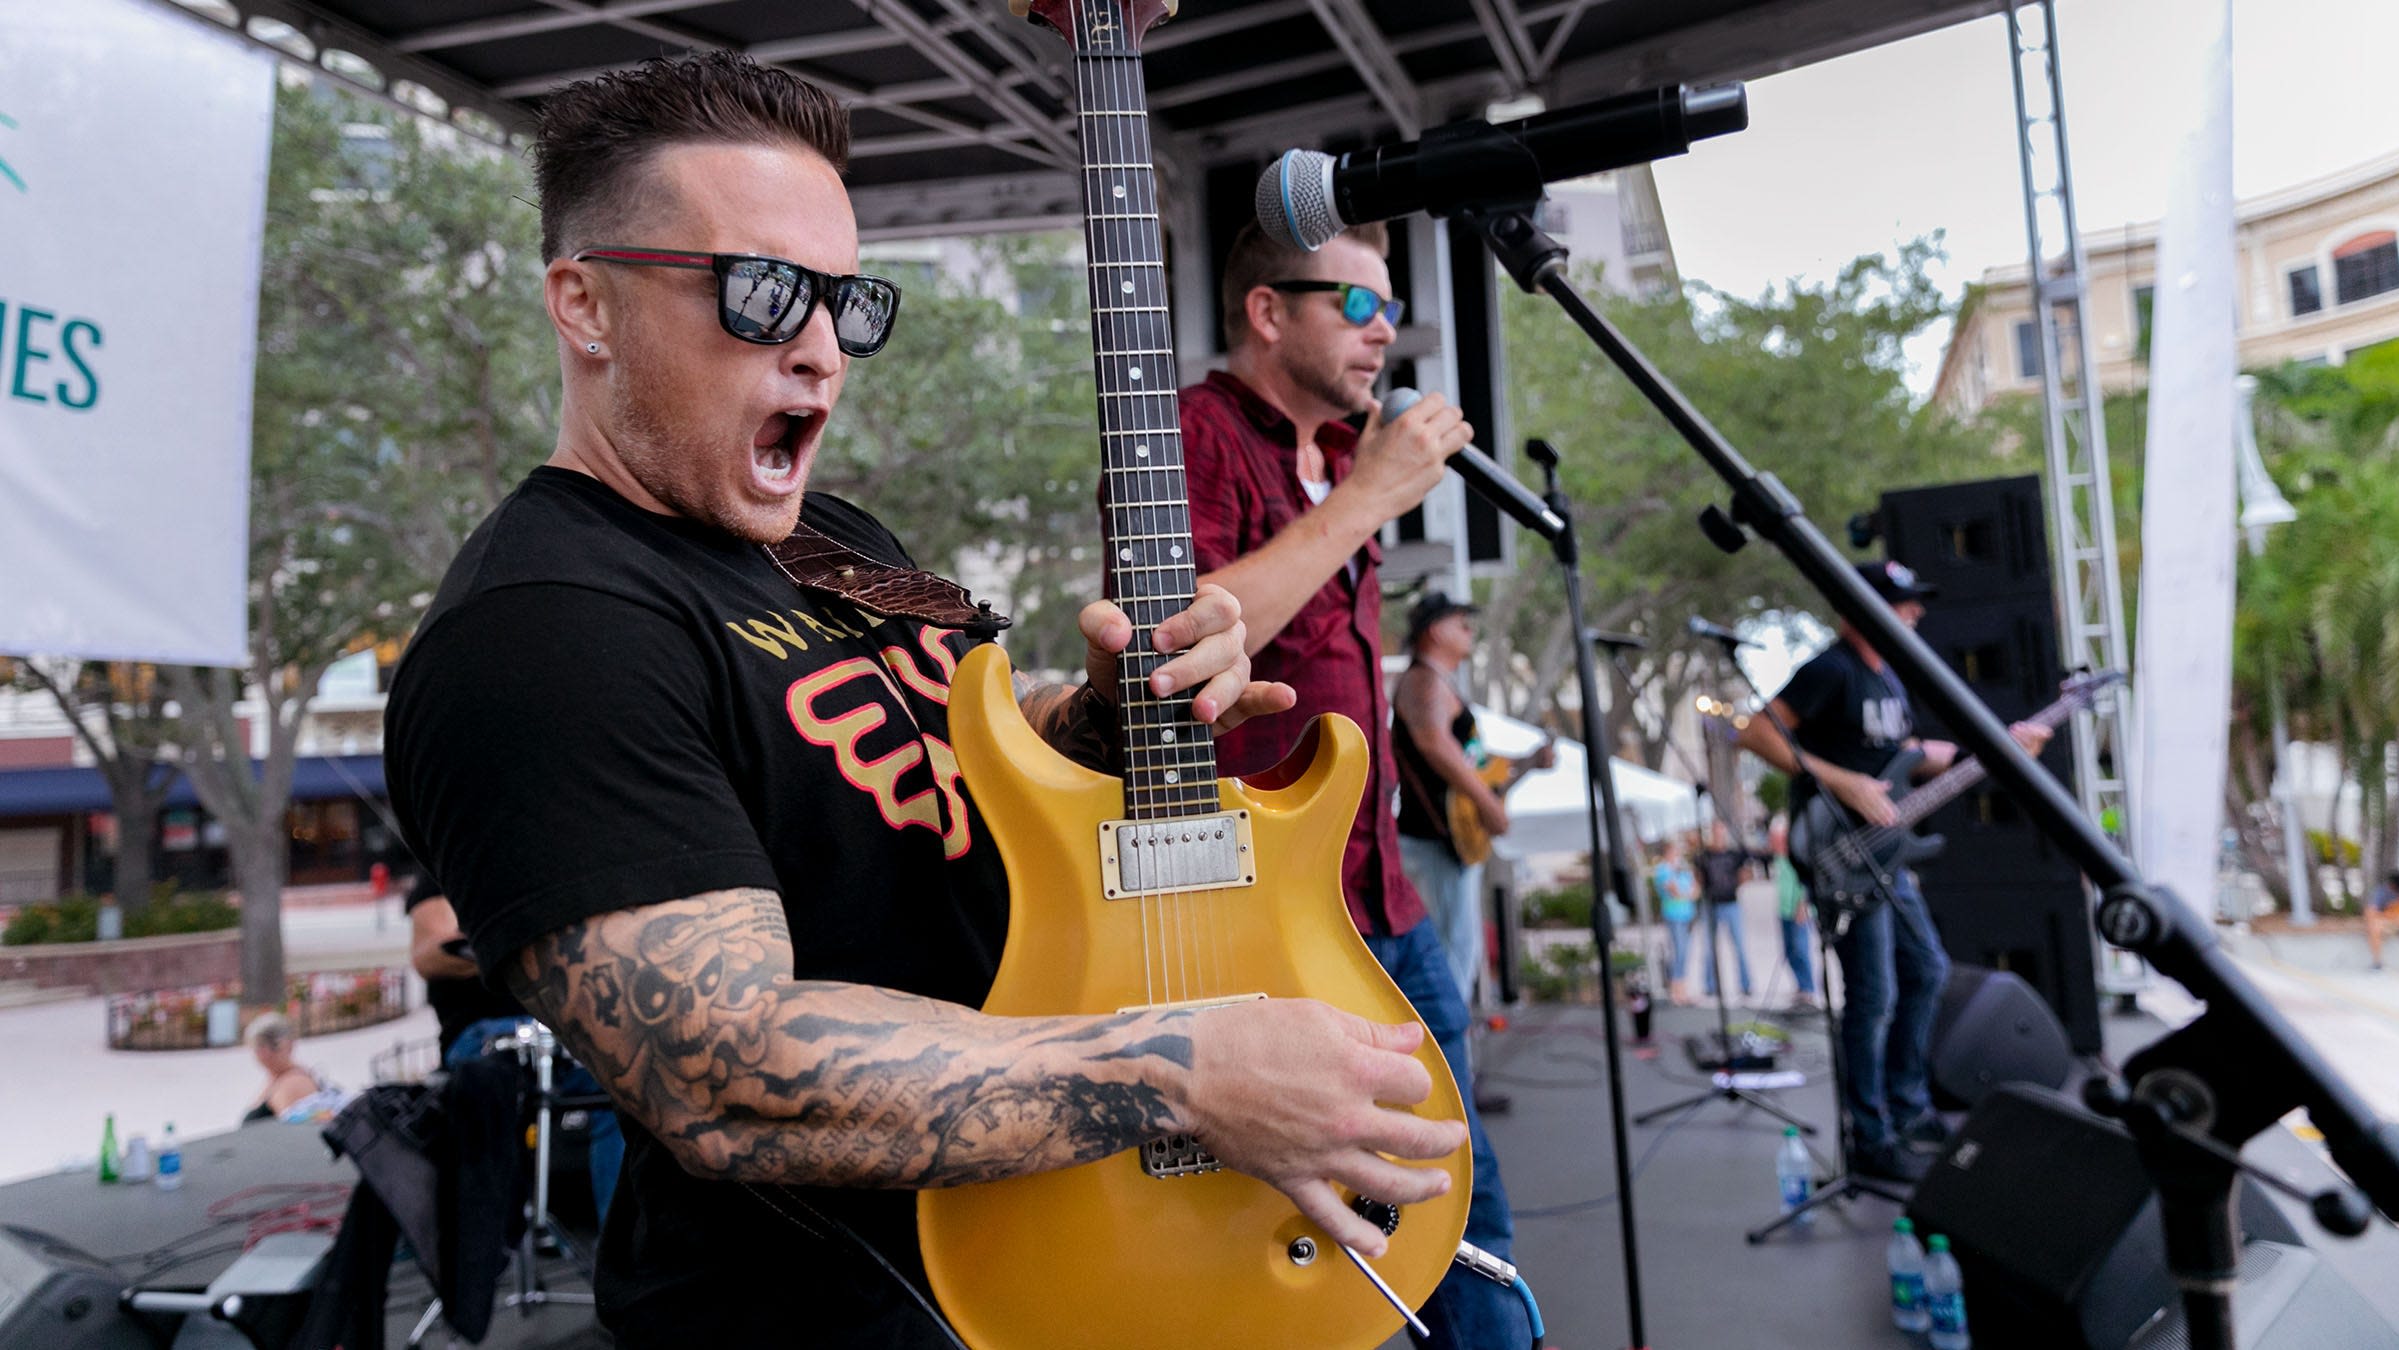 West Palm's weekly concert takes third place in nation for 'Best Outdoor Concert Series'